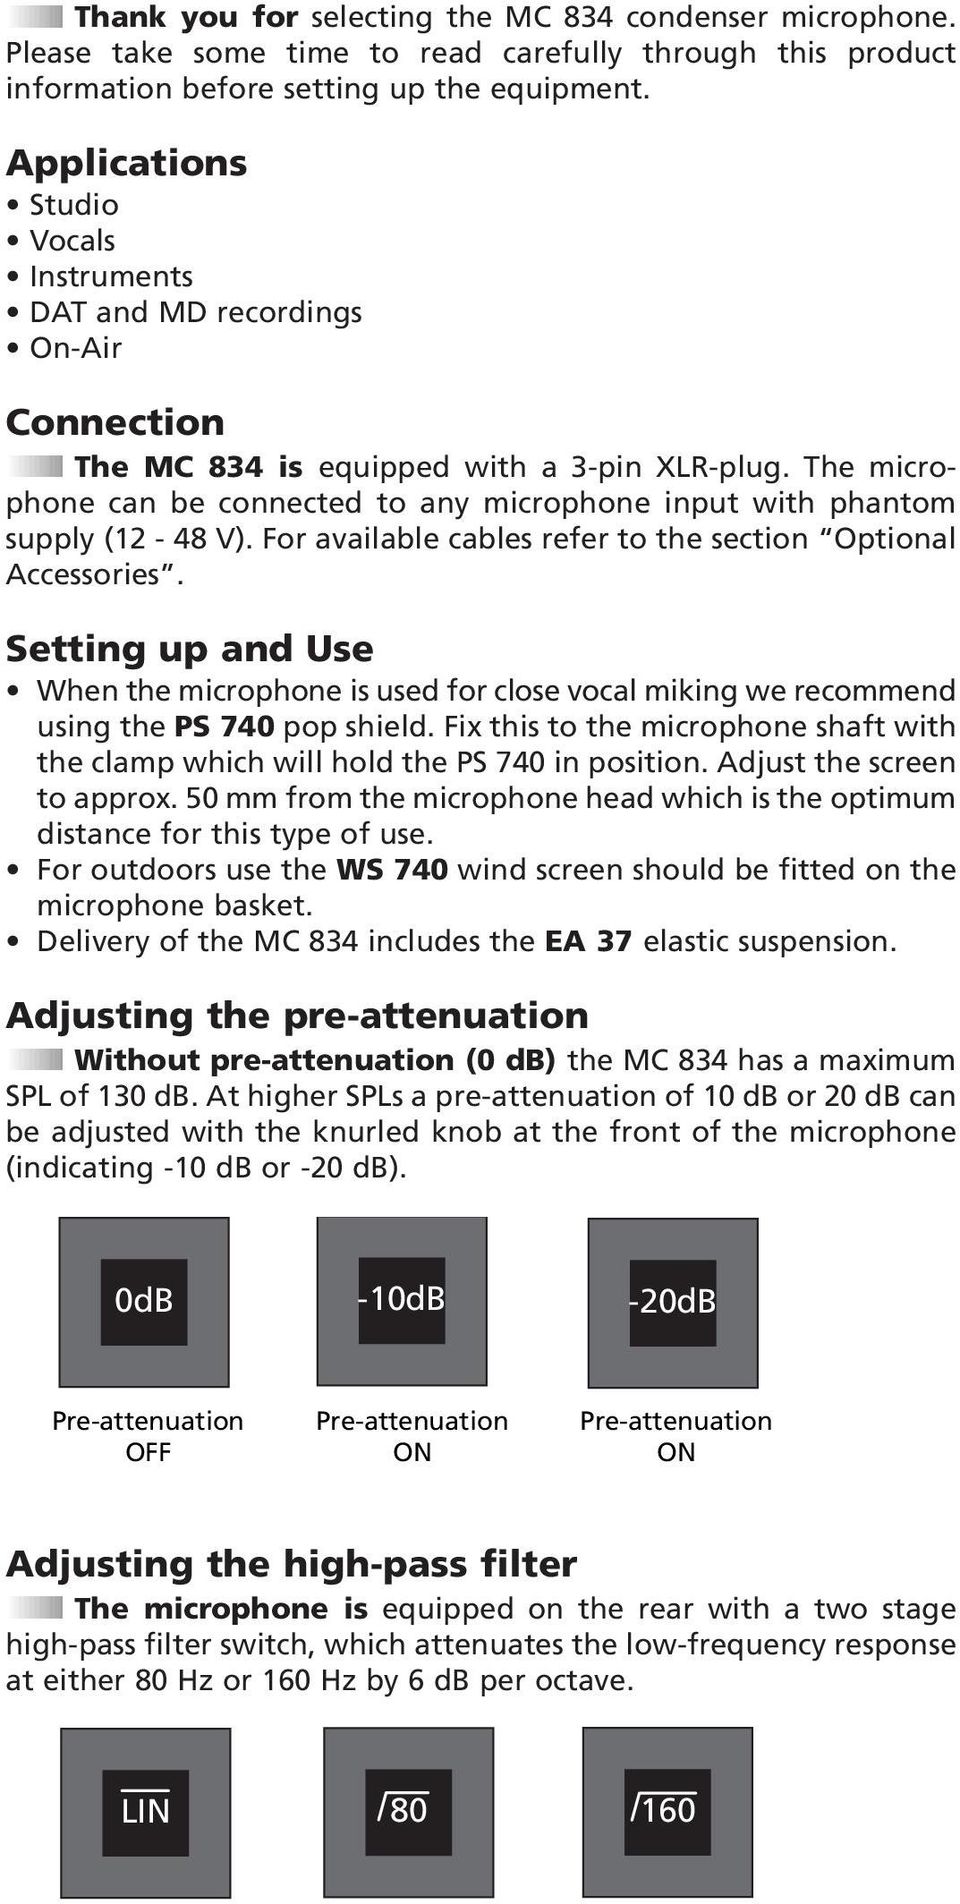 The microphone can be connected to any microphone input with phantom supply (12-48 V). For available cables refer to the section Optional Accessories.